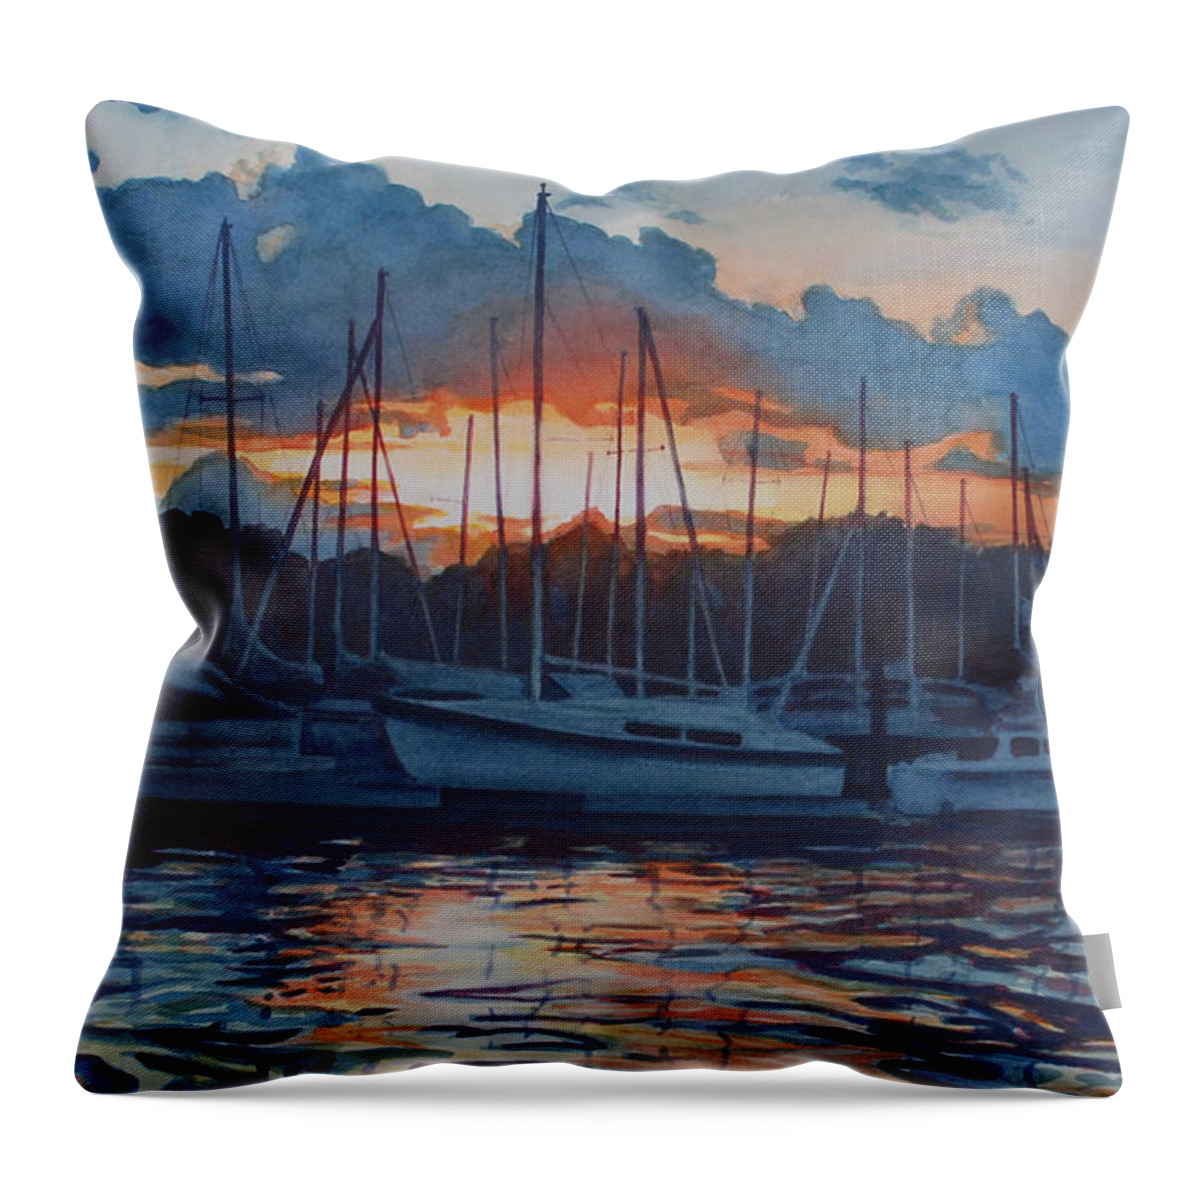 Lake Throw Pillow featuring the painting God's Glory Painted on the Heavens by Heidi E Nelson